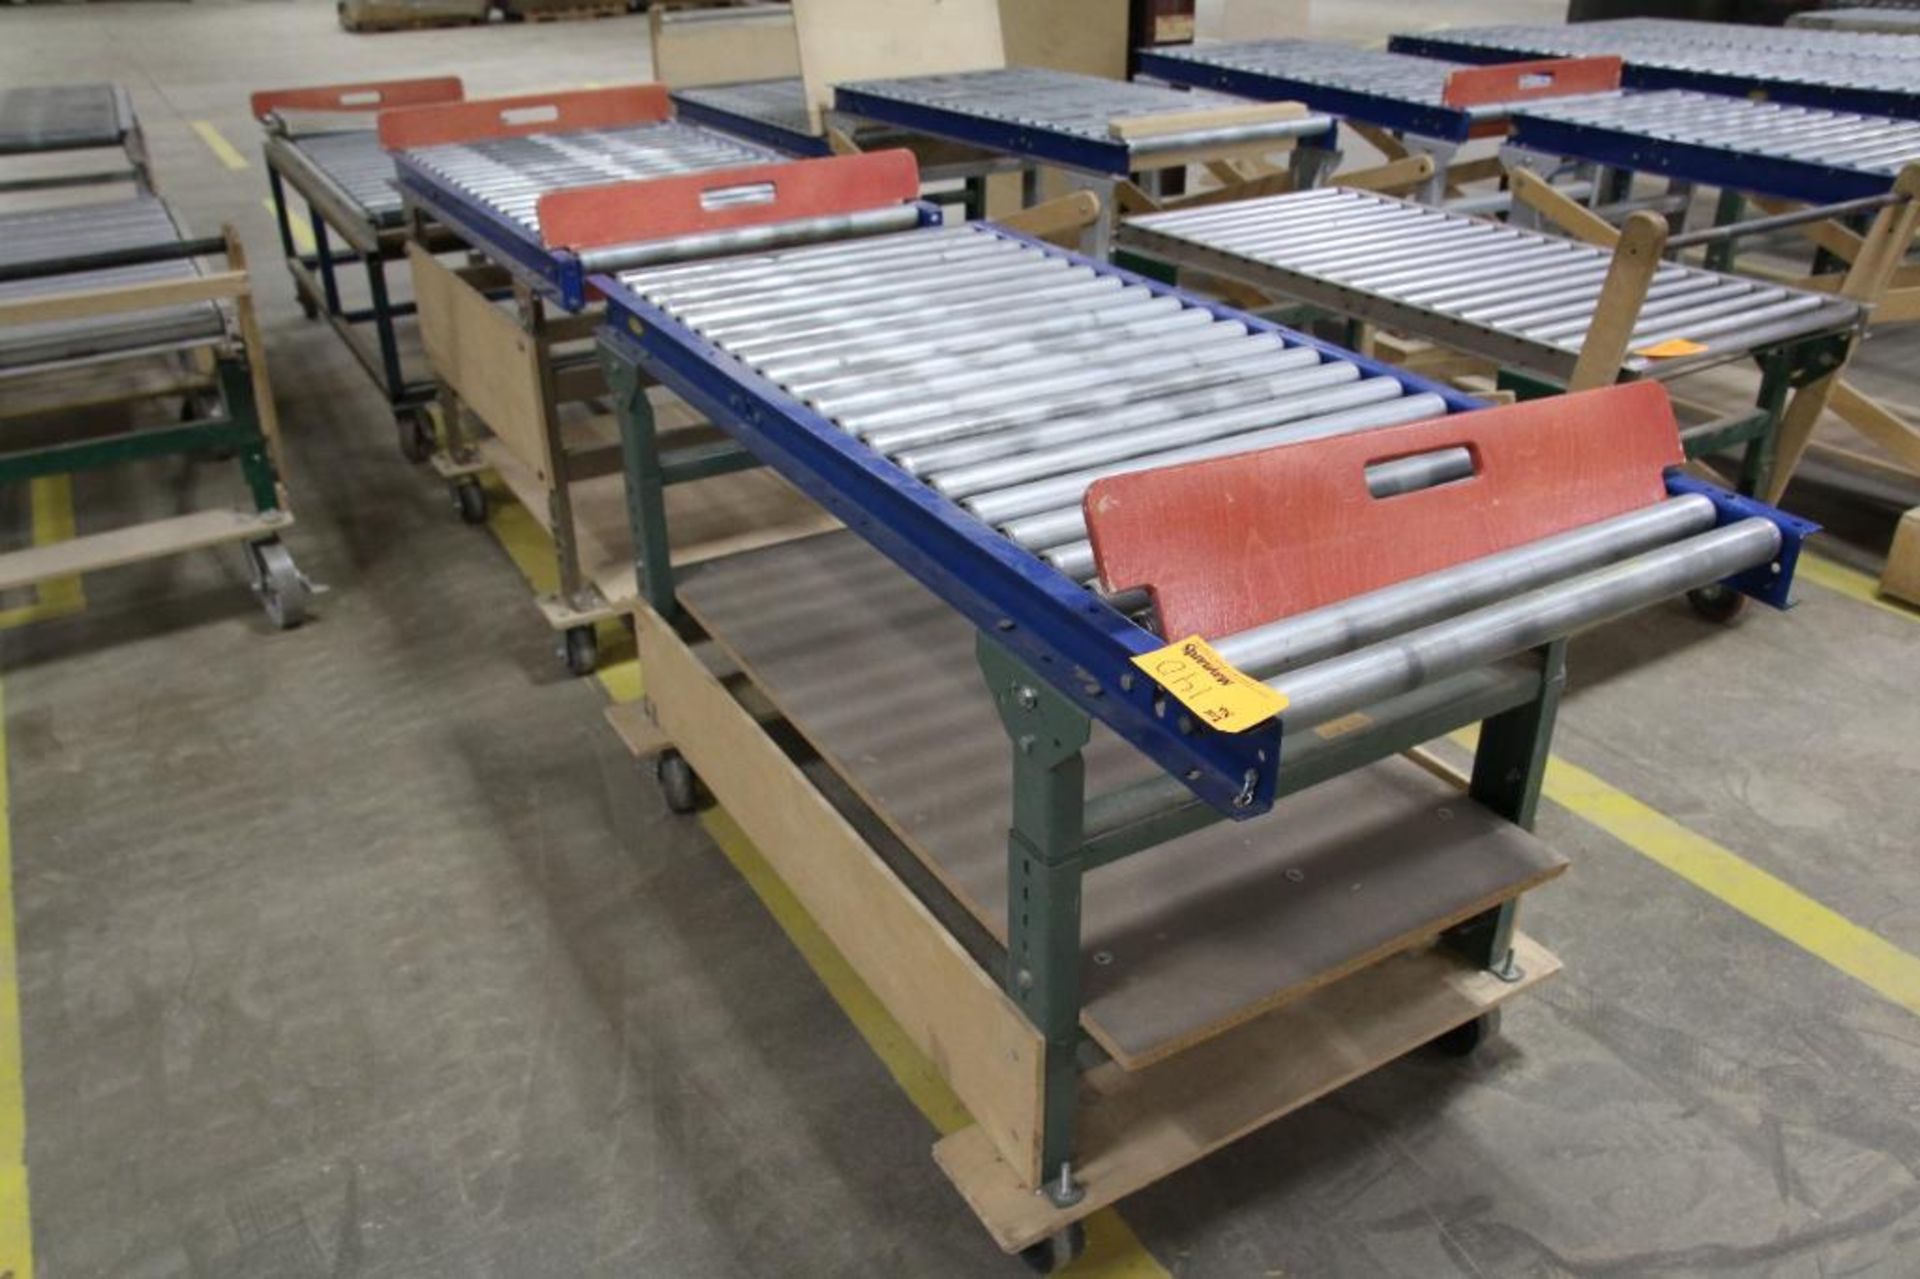 LOT: (3) Roller Conveyor Lines on Wheels, 60" x 30", 66" x 30" and 82" x 30", Heights of 30" and 36"